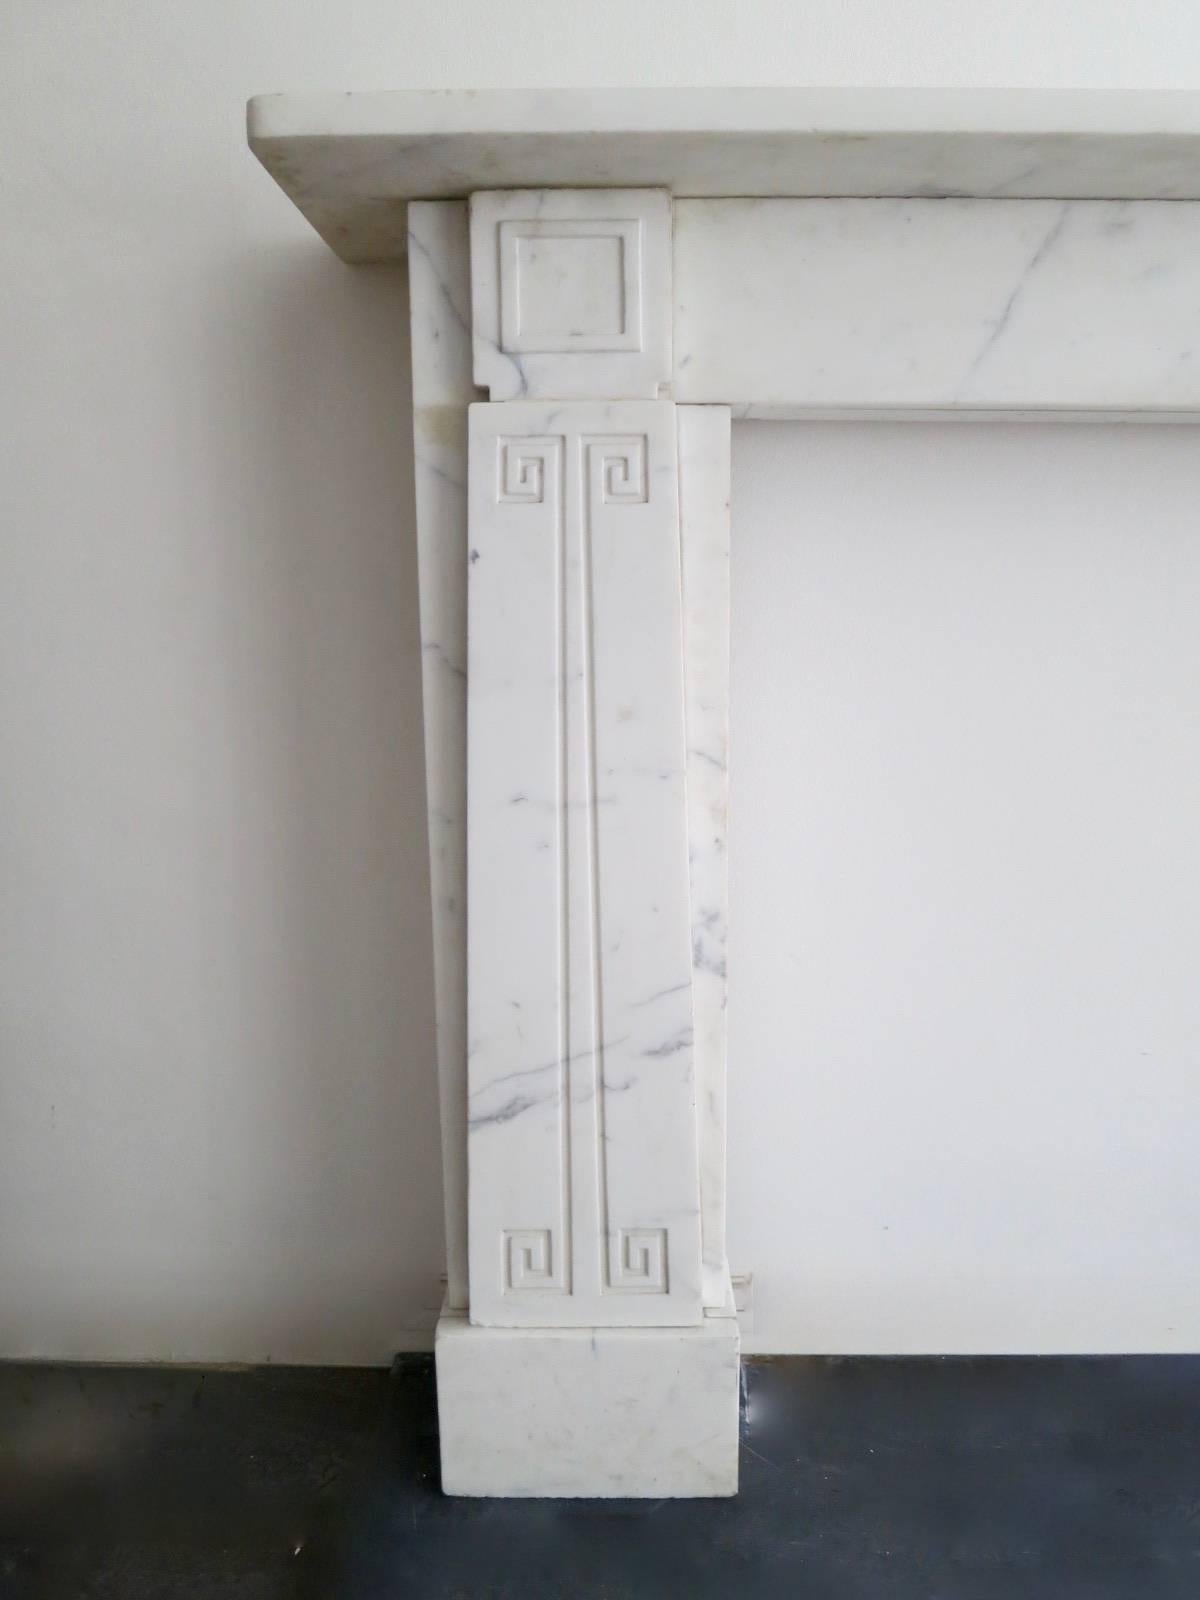 A Soane style fireplace in Italian veined white marble, with tapering Greek key decorated jamb panels. Square panelled end blocks, with simple frieze and shelf. All supported on large square foot blocks, mid-late 20th century.